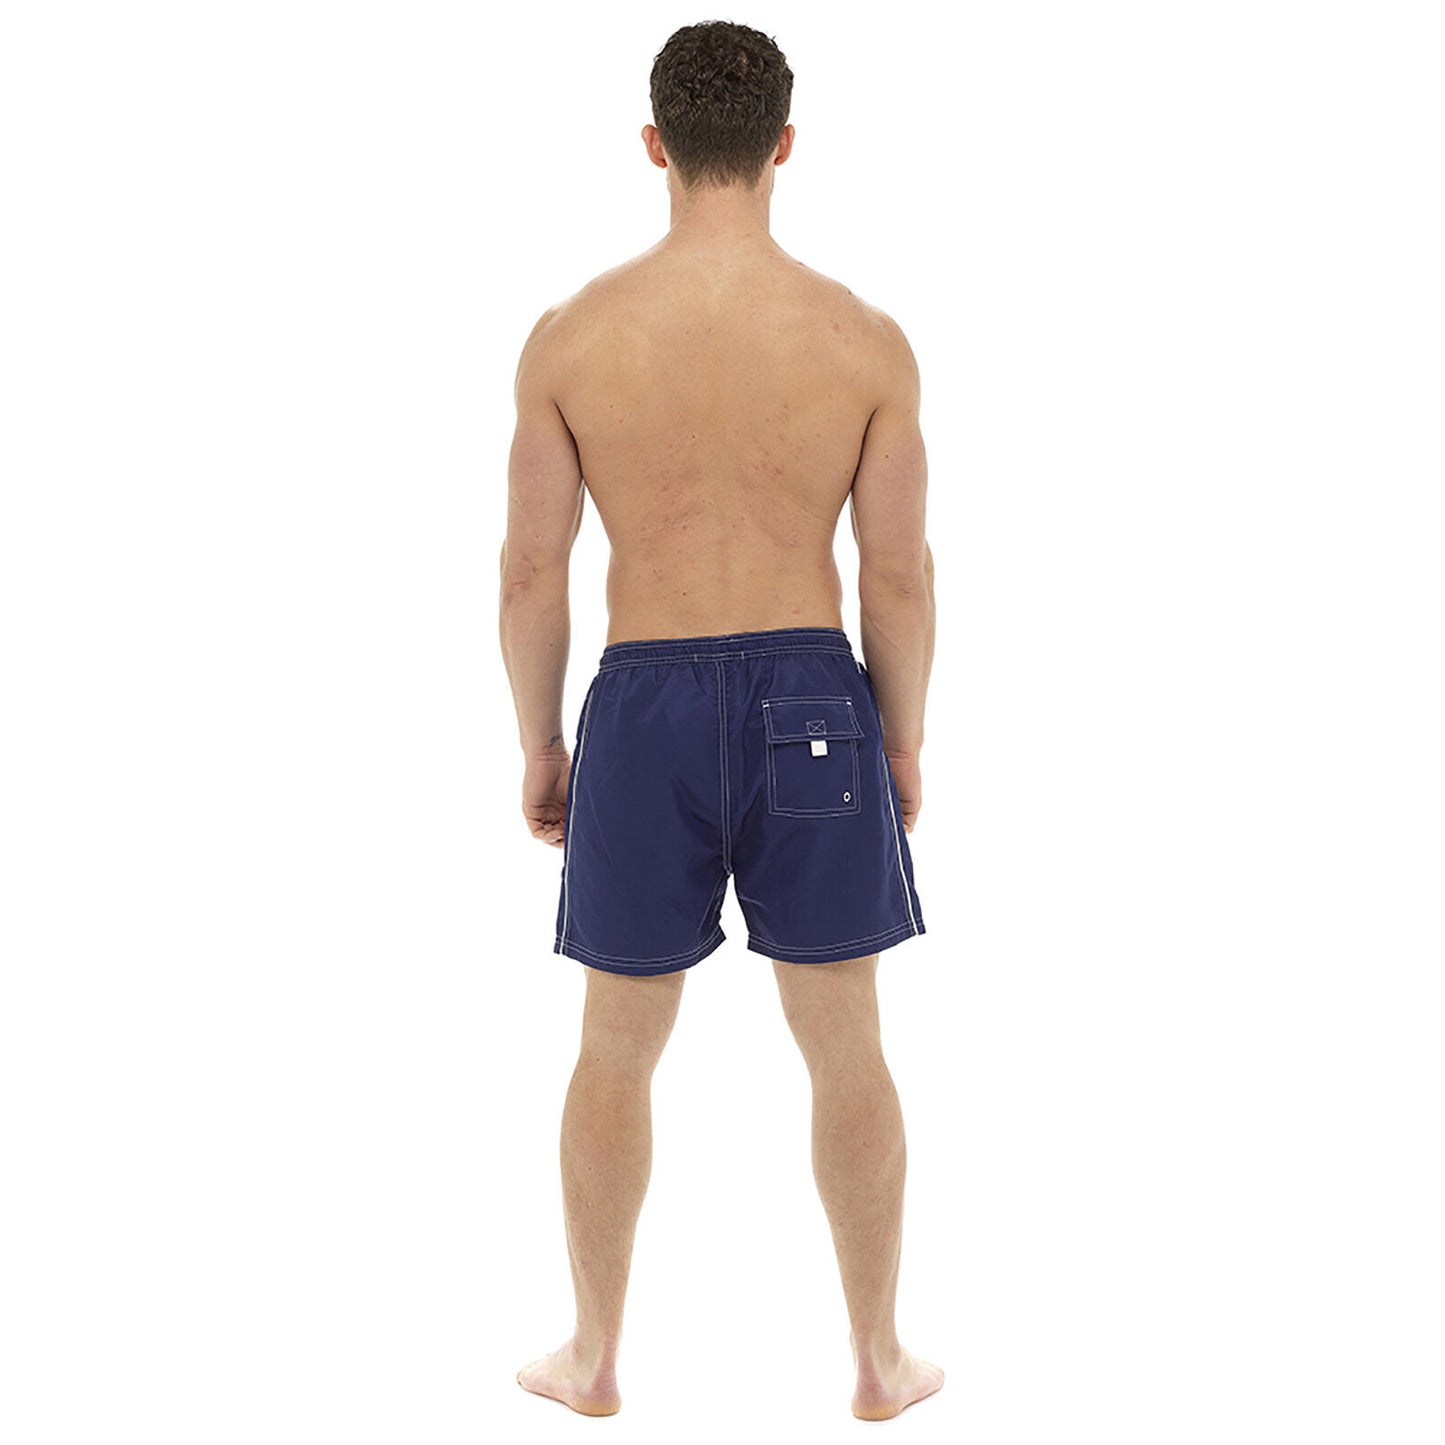 MENS MESH LINED QUICK DRY SHORTS SWIMMING GYM RUNNING SUMMER BEACH SPORTS TRUNKS